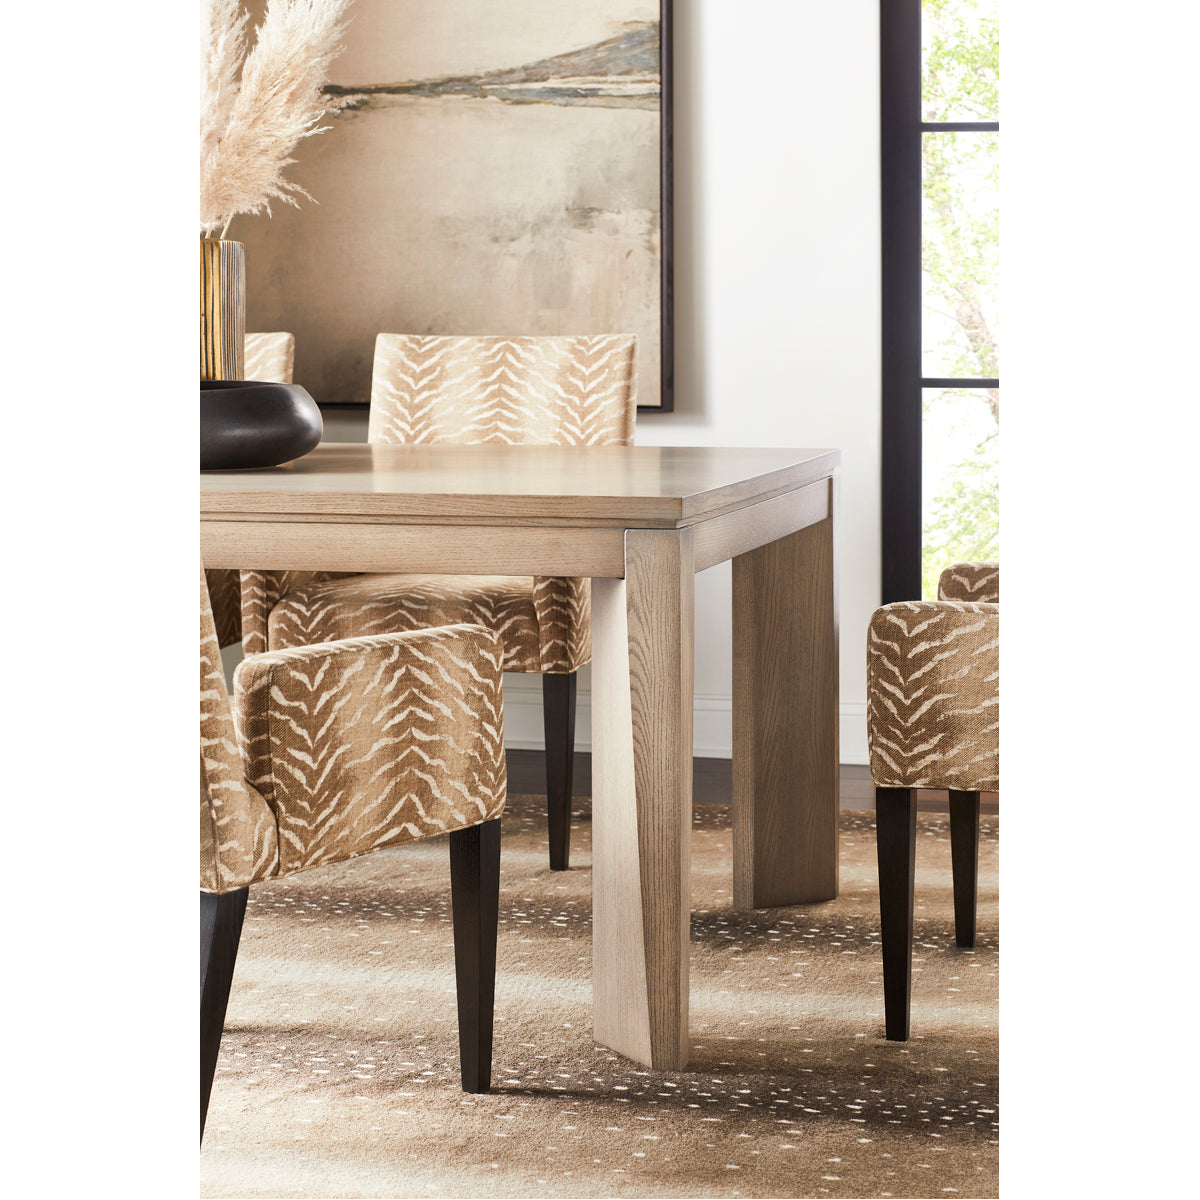 Vanguard Furniture Wedge Dining Table with Wedge